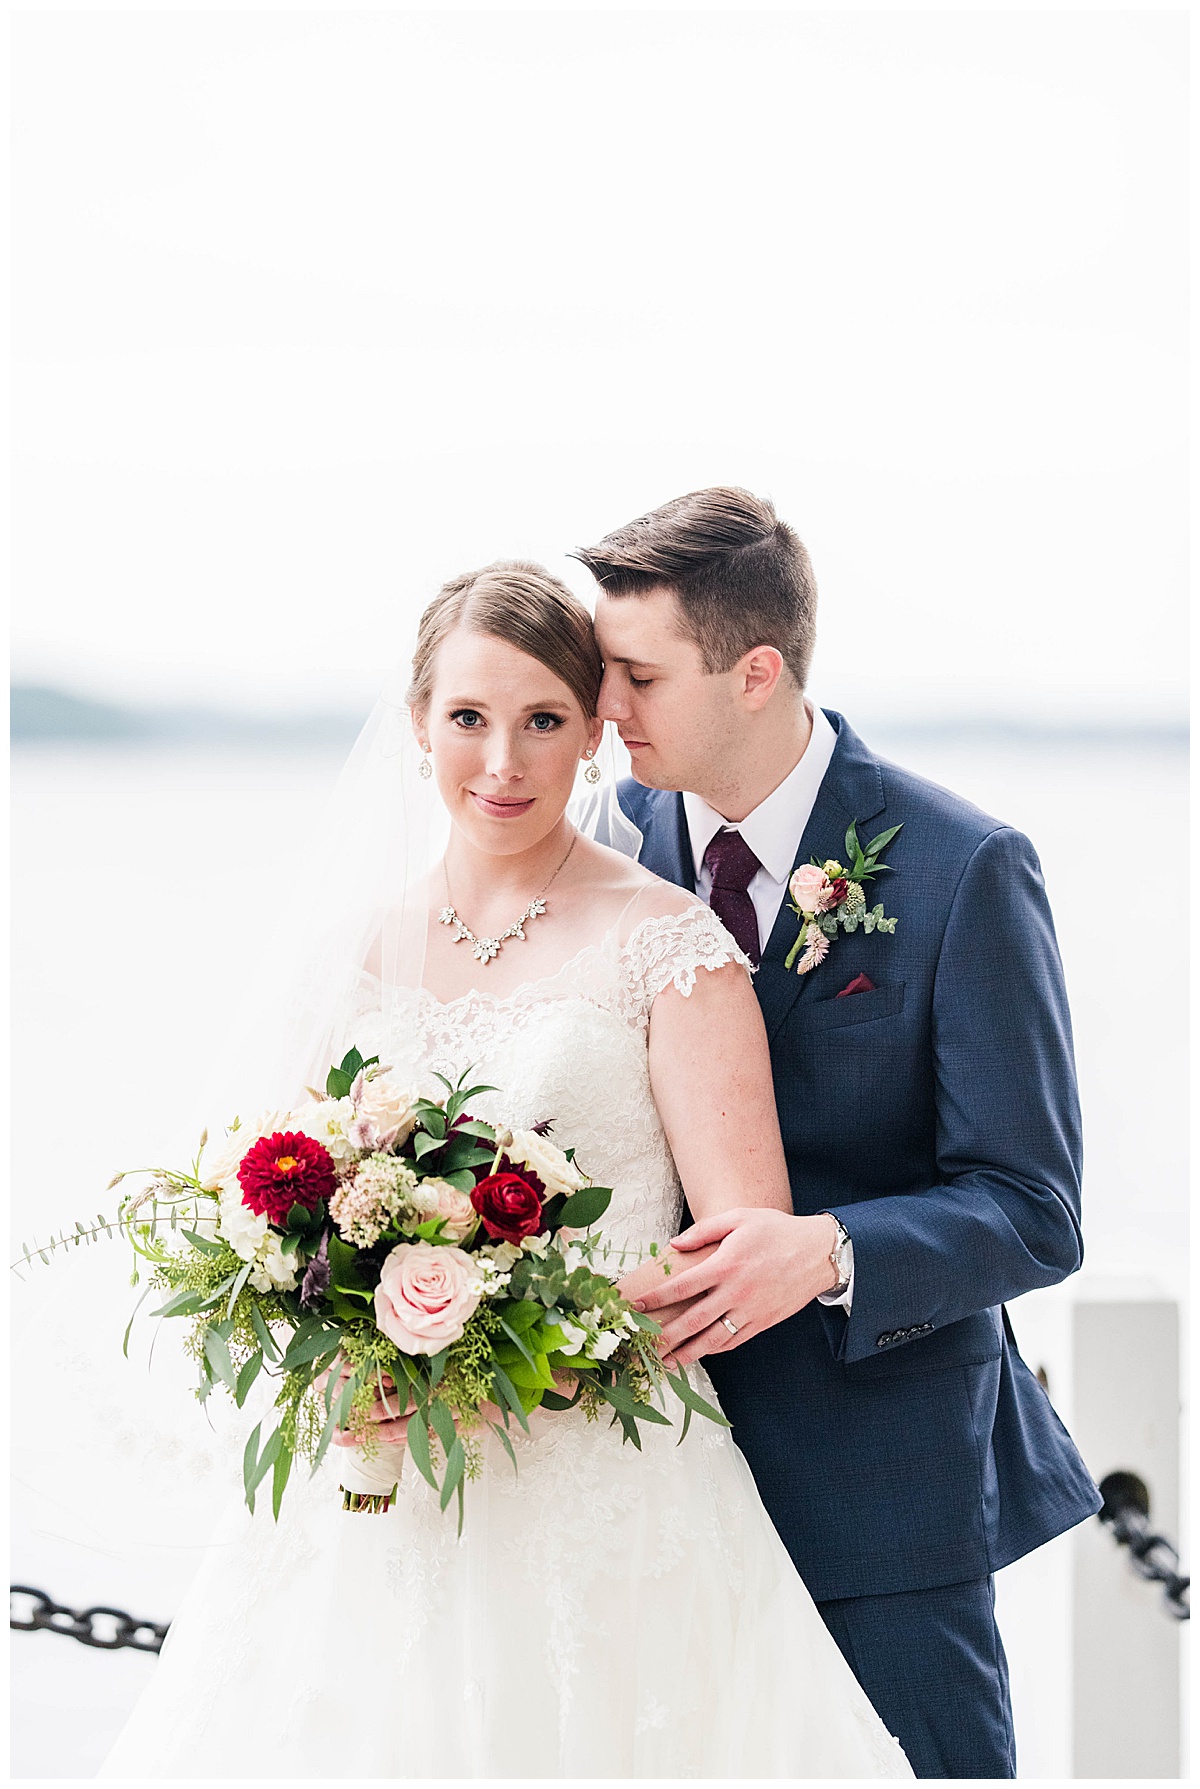 Boathouse at Sunday Park Wedding: blush and burgundy wedding colors, bridal flowers, bride and groom portrait, waterview